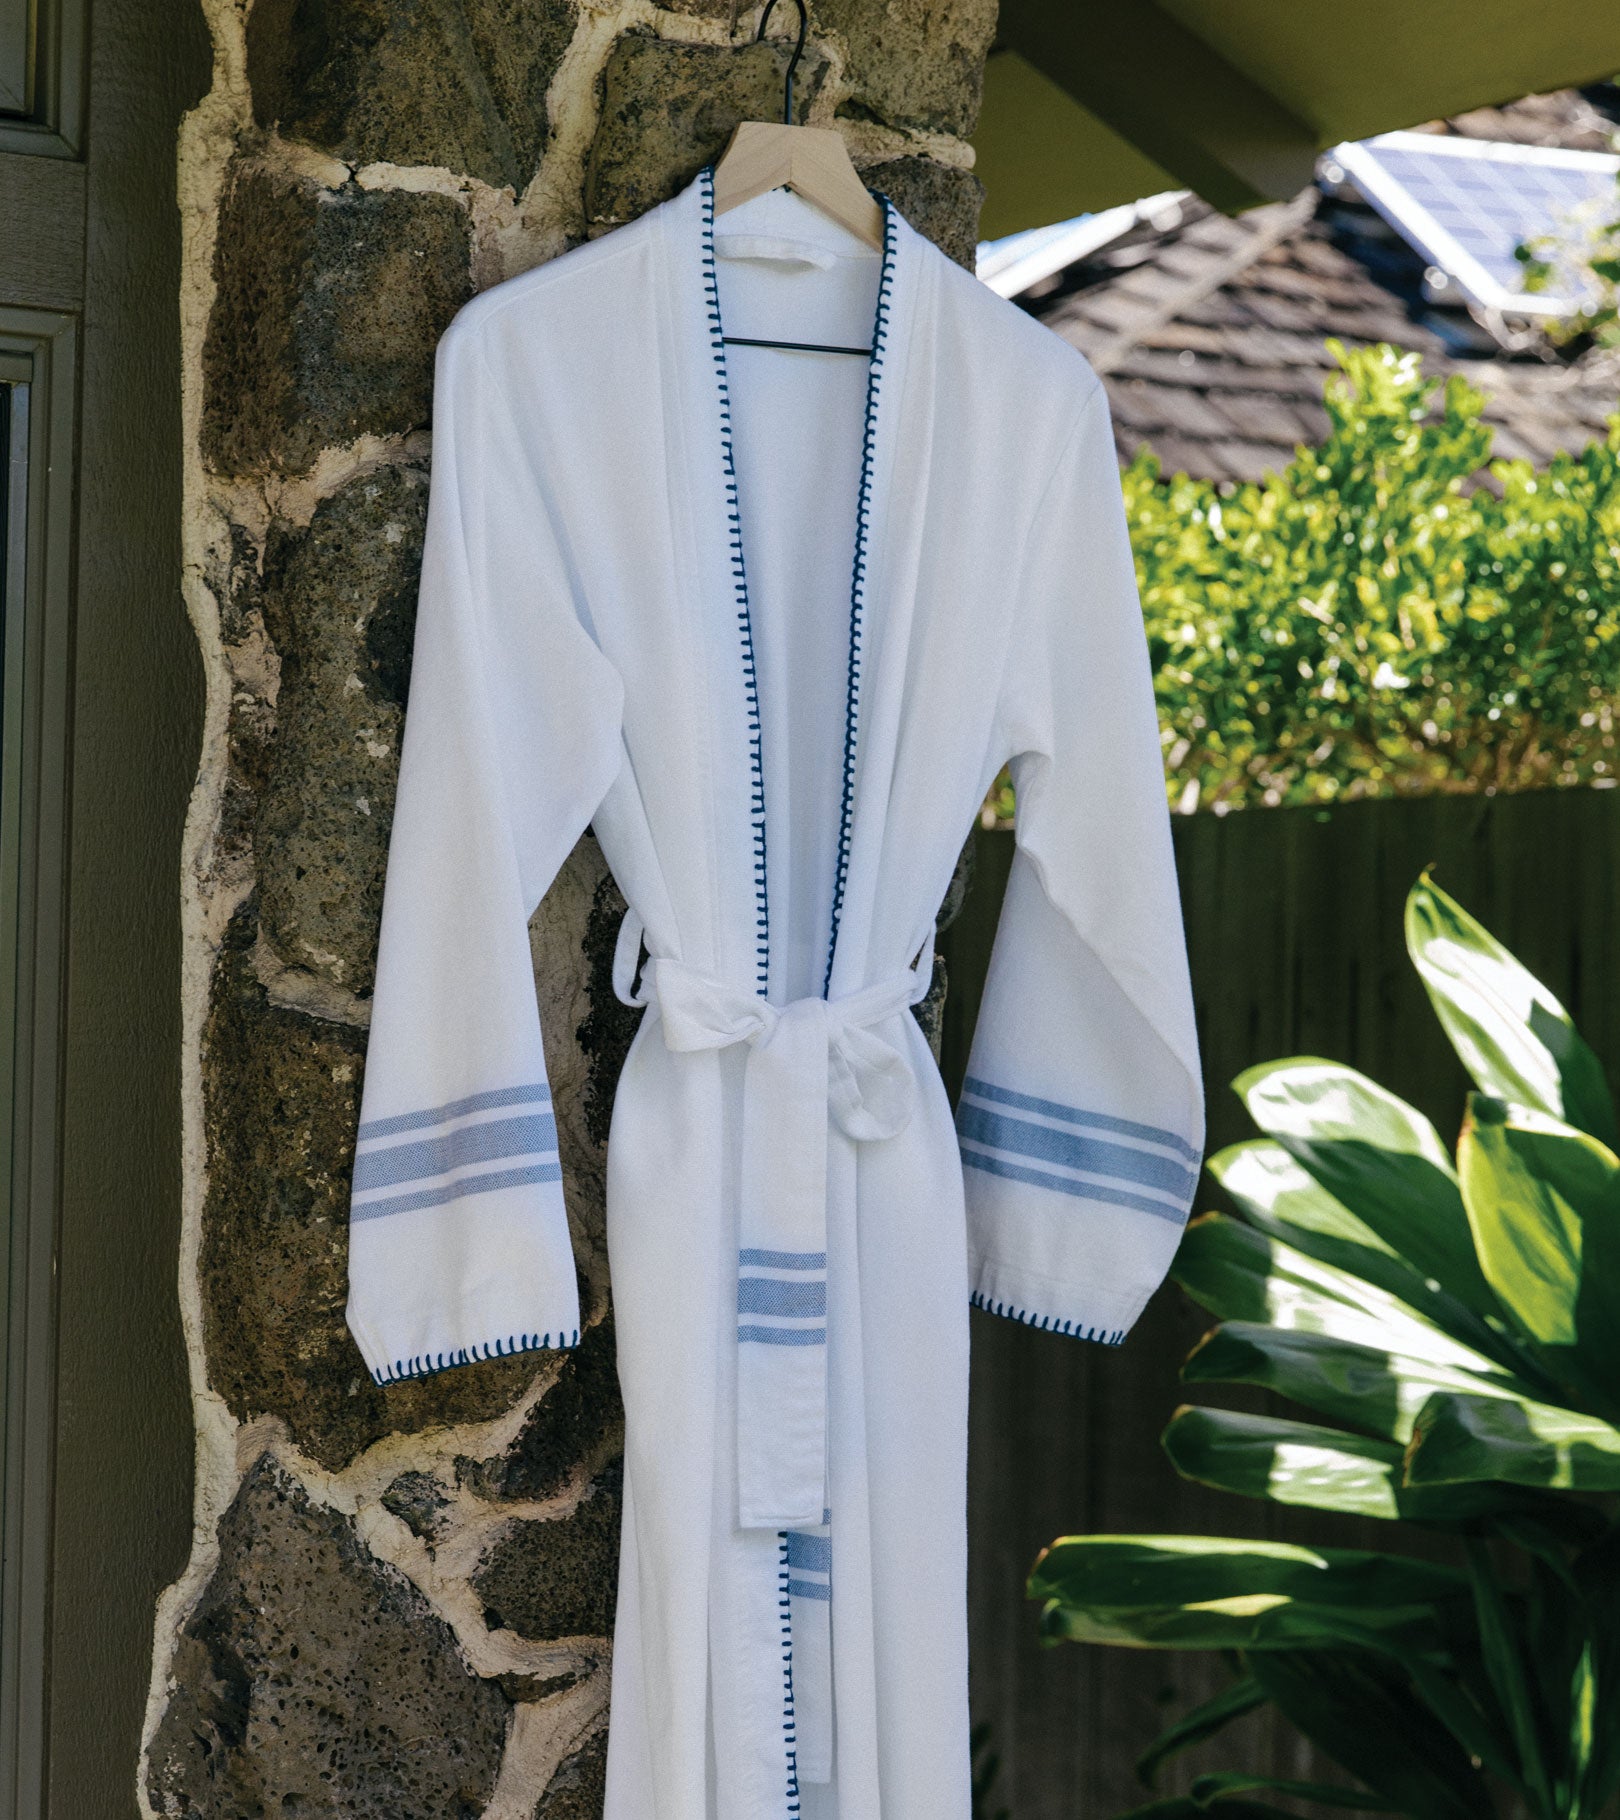 Averylily Turkish Cotton Stripe Bathrobe in White with Ocean Blue details.